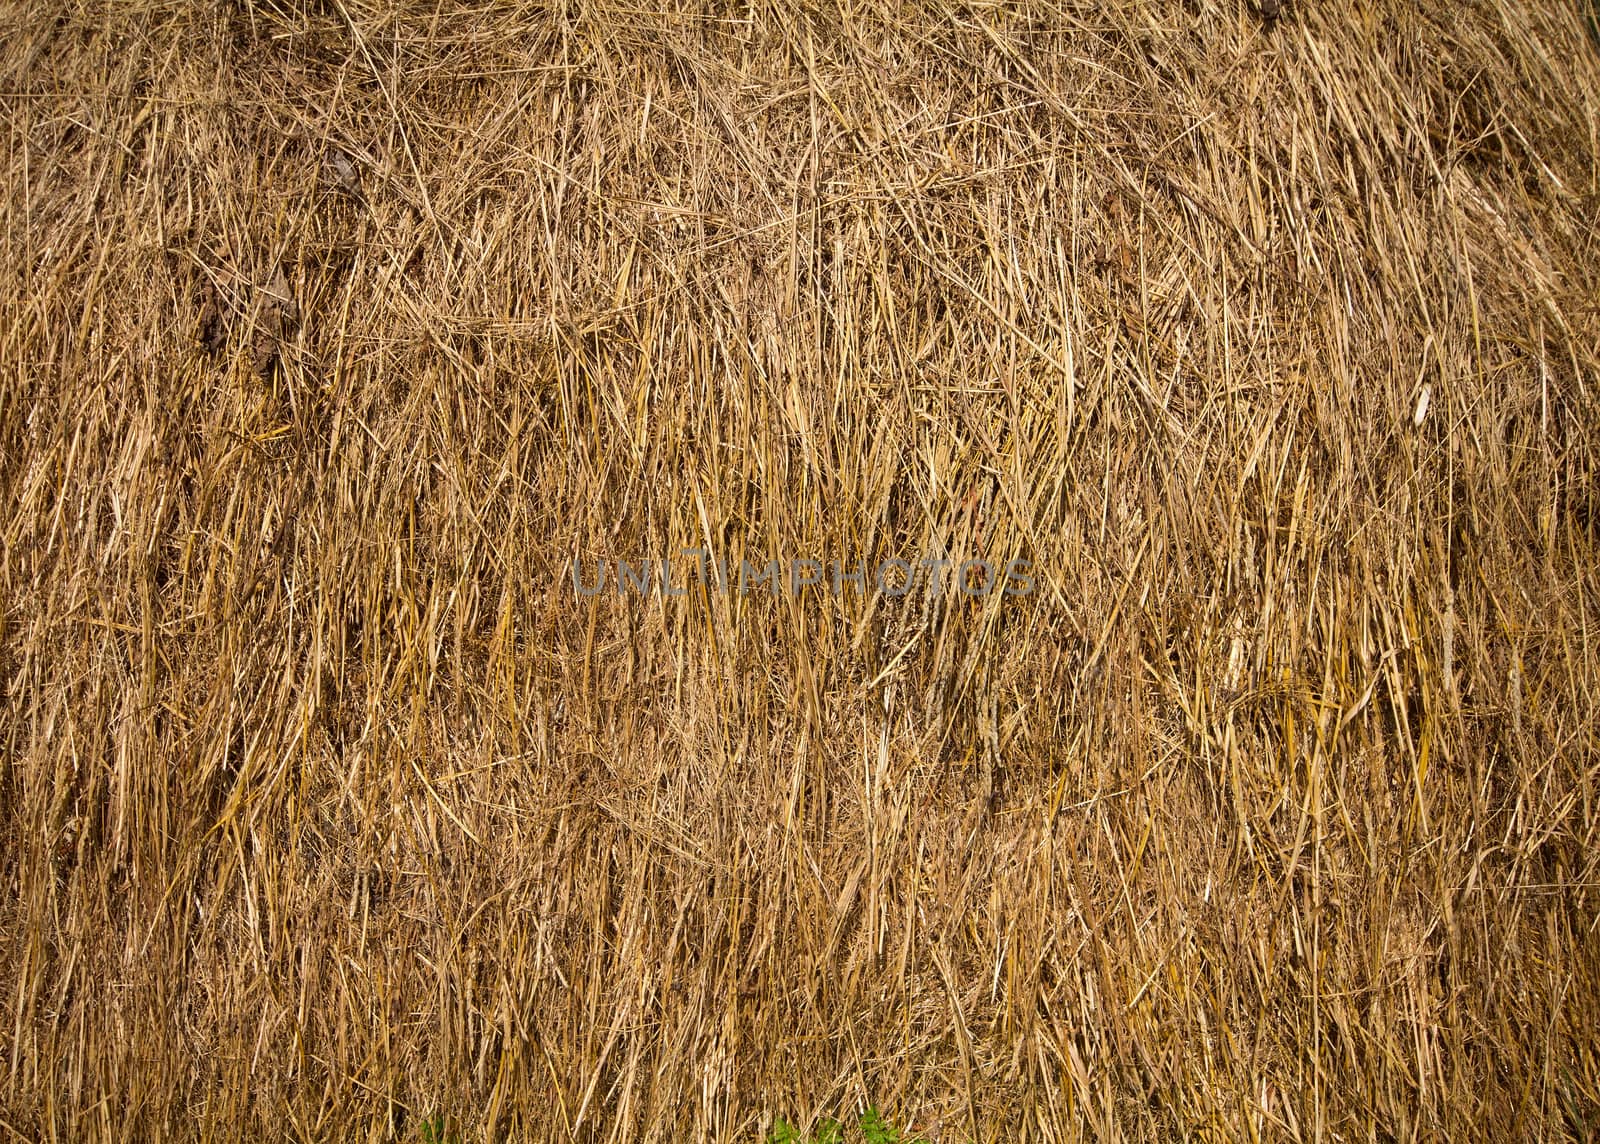 Dry hay closeup image as natural background